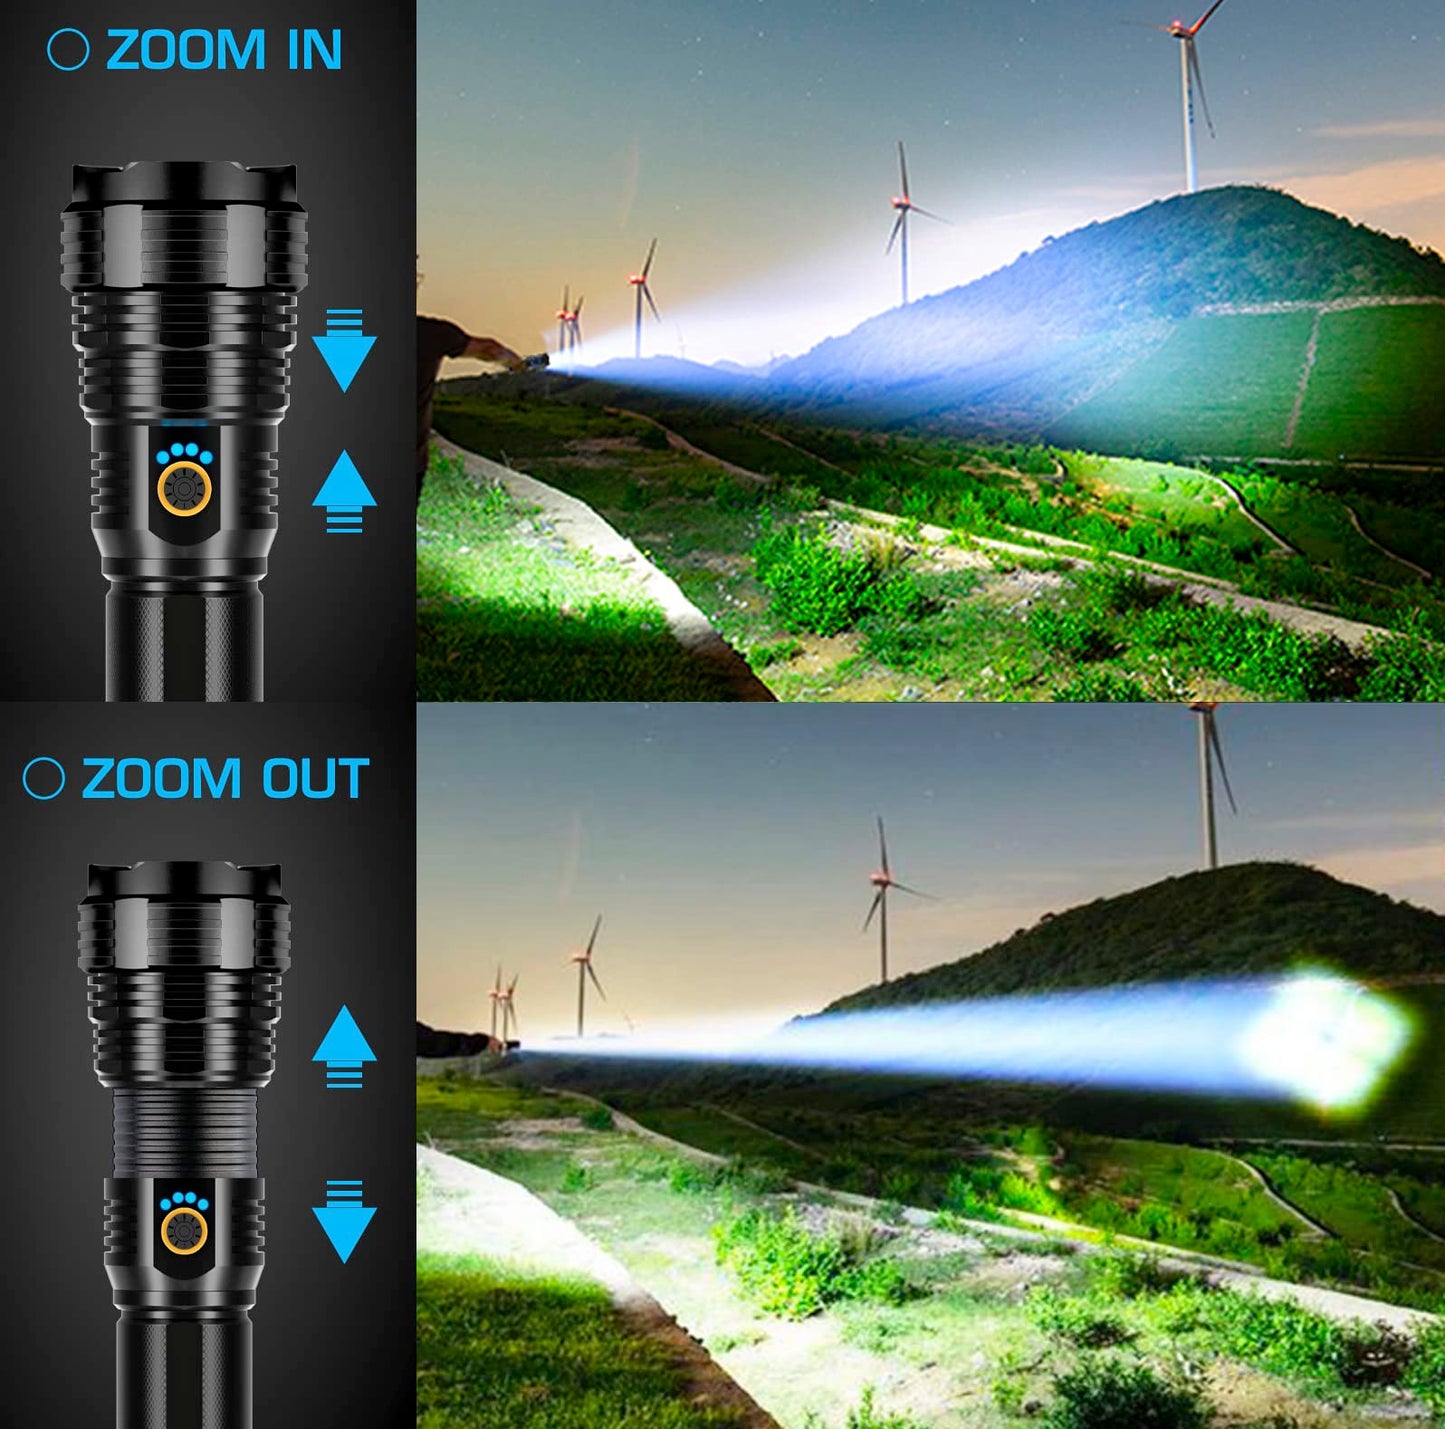 Rechargeable Flashlights 990000 High Lumens, High Power Led Flashlight, XHP70.2 Powerful Tactical Flashlight with Zoomable, 5 Modes, IPX7 Waterproof, Flashlight for Camping, Hiking, Emergencies